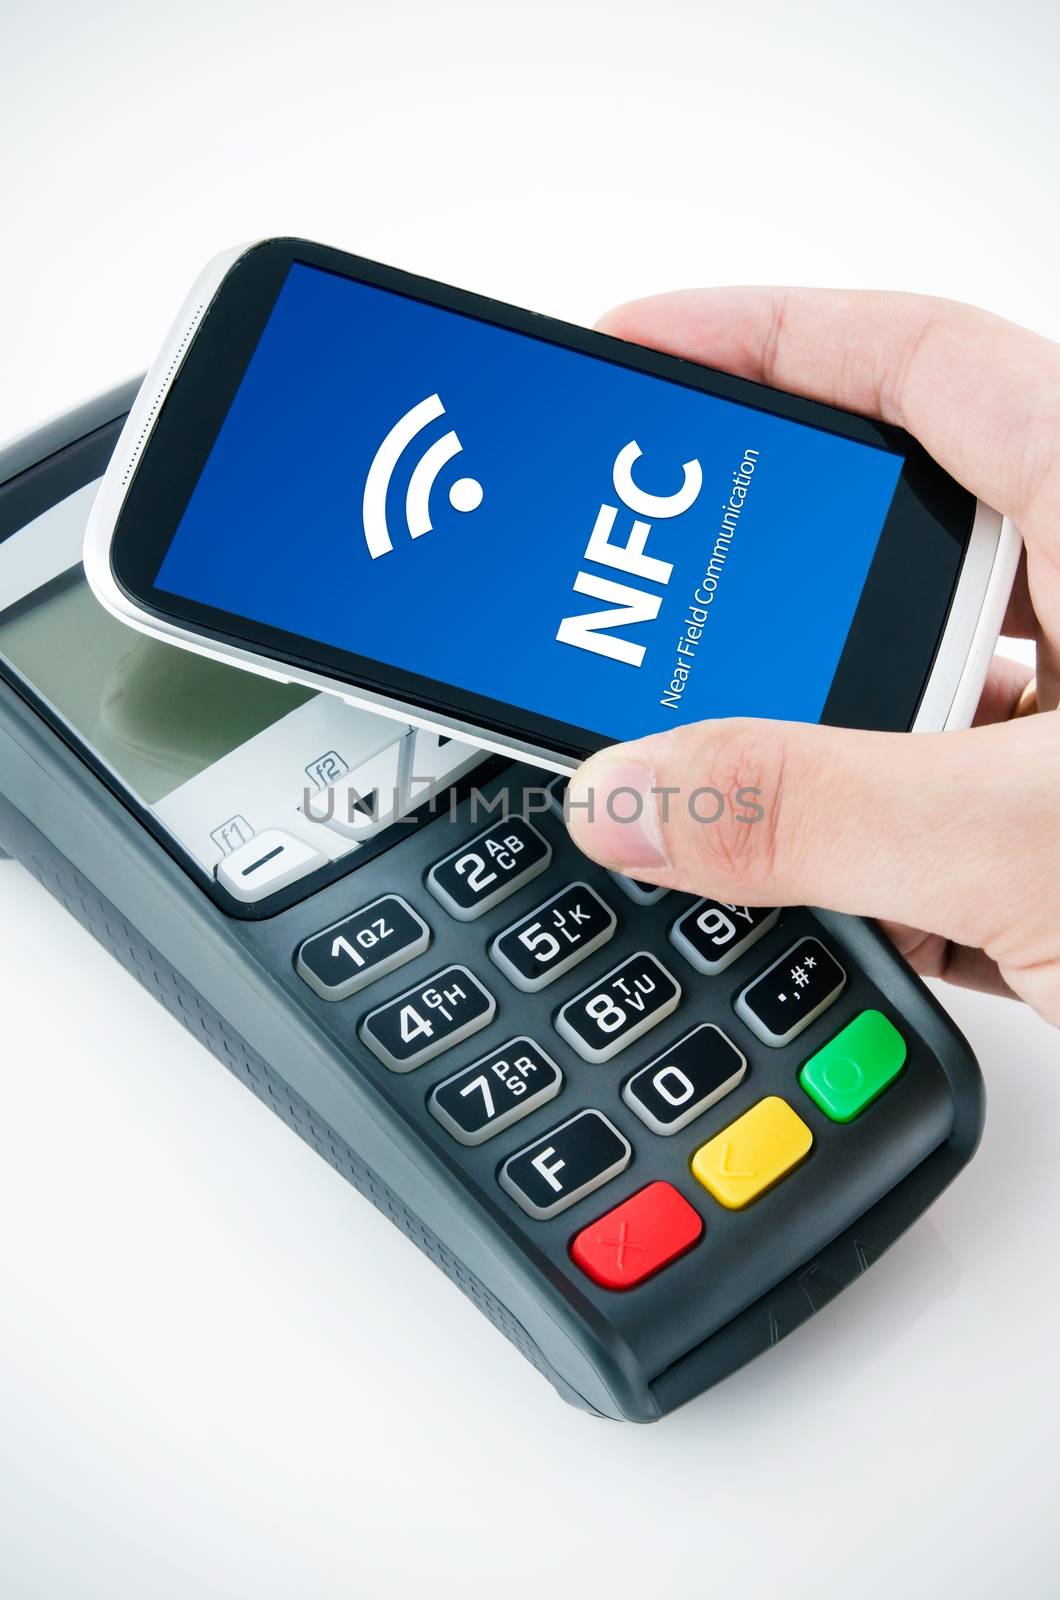 Contactless payment card with NFC chip in smart phone by simpson33